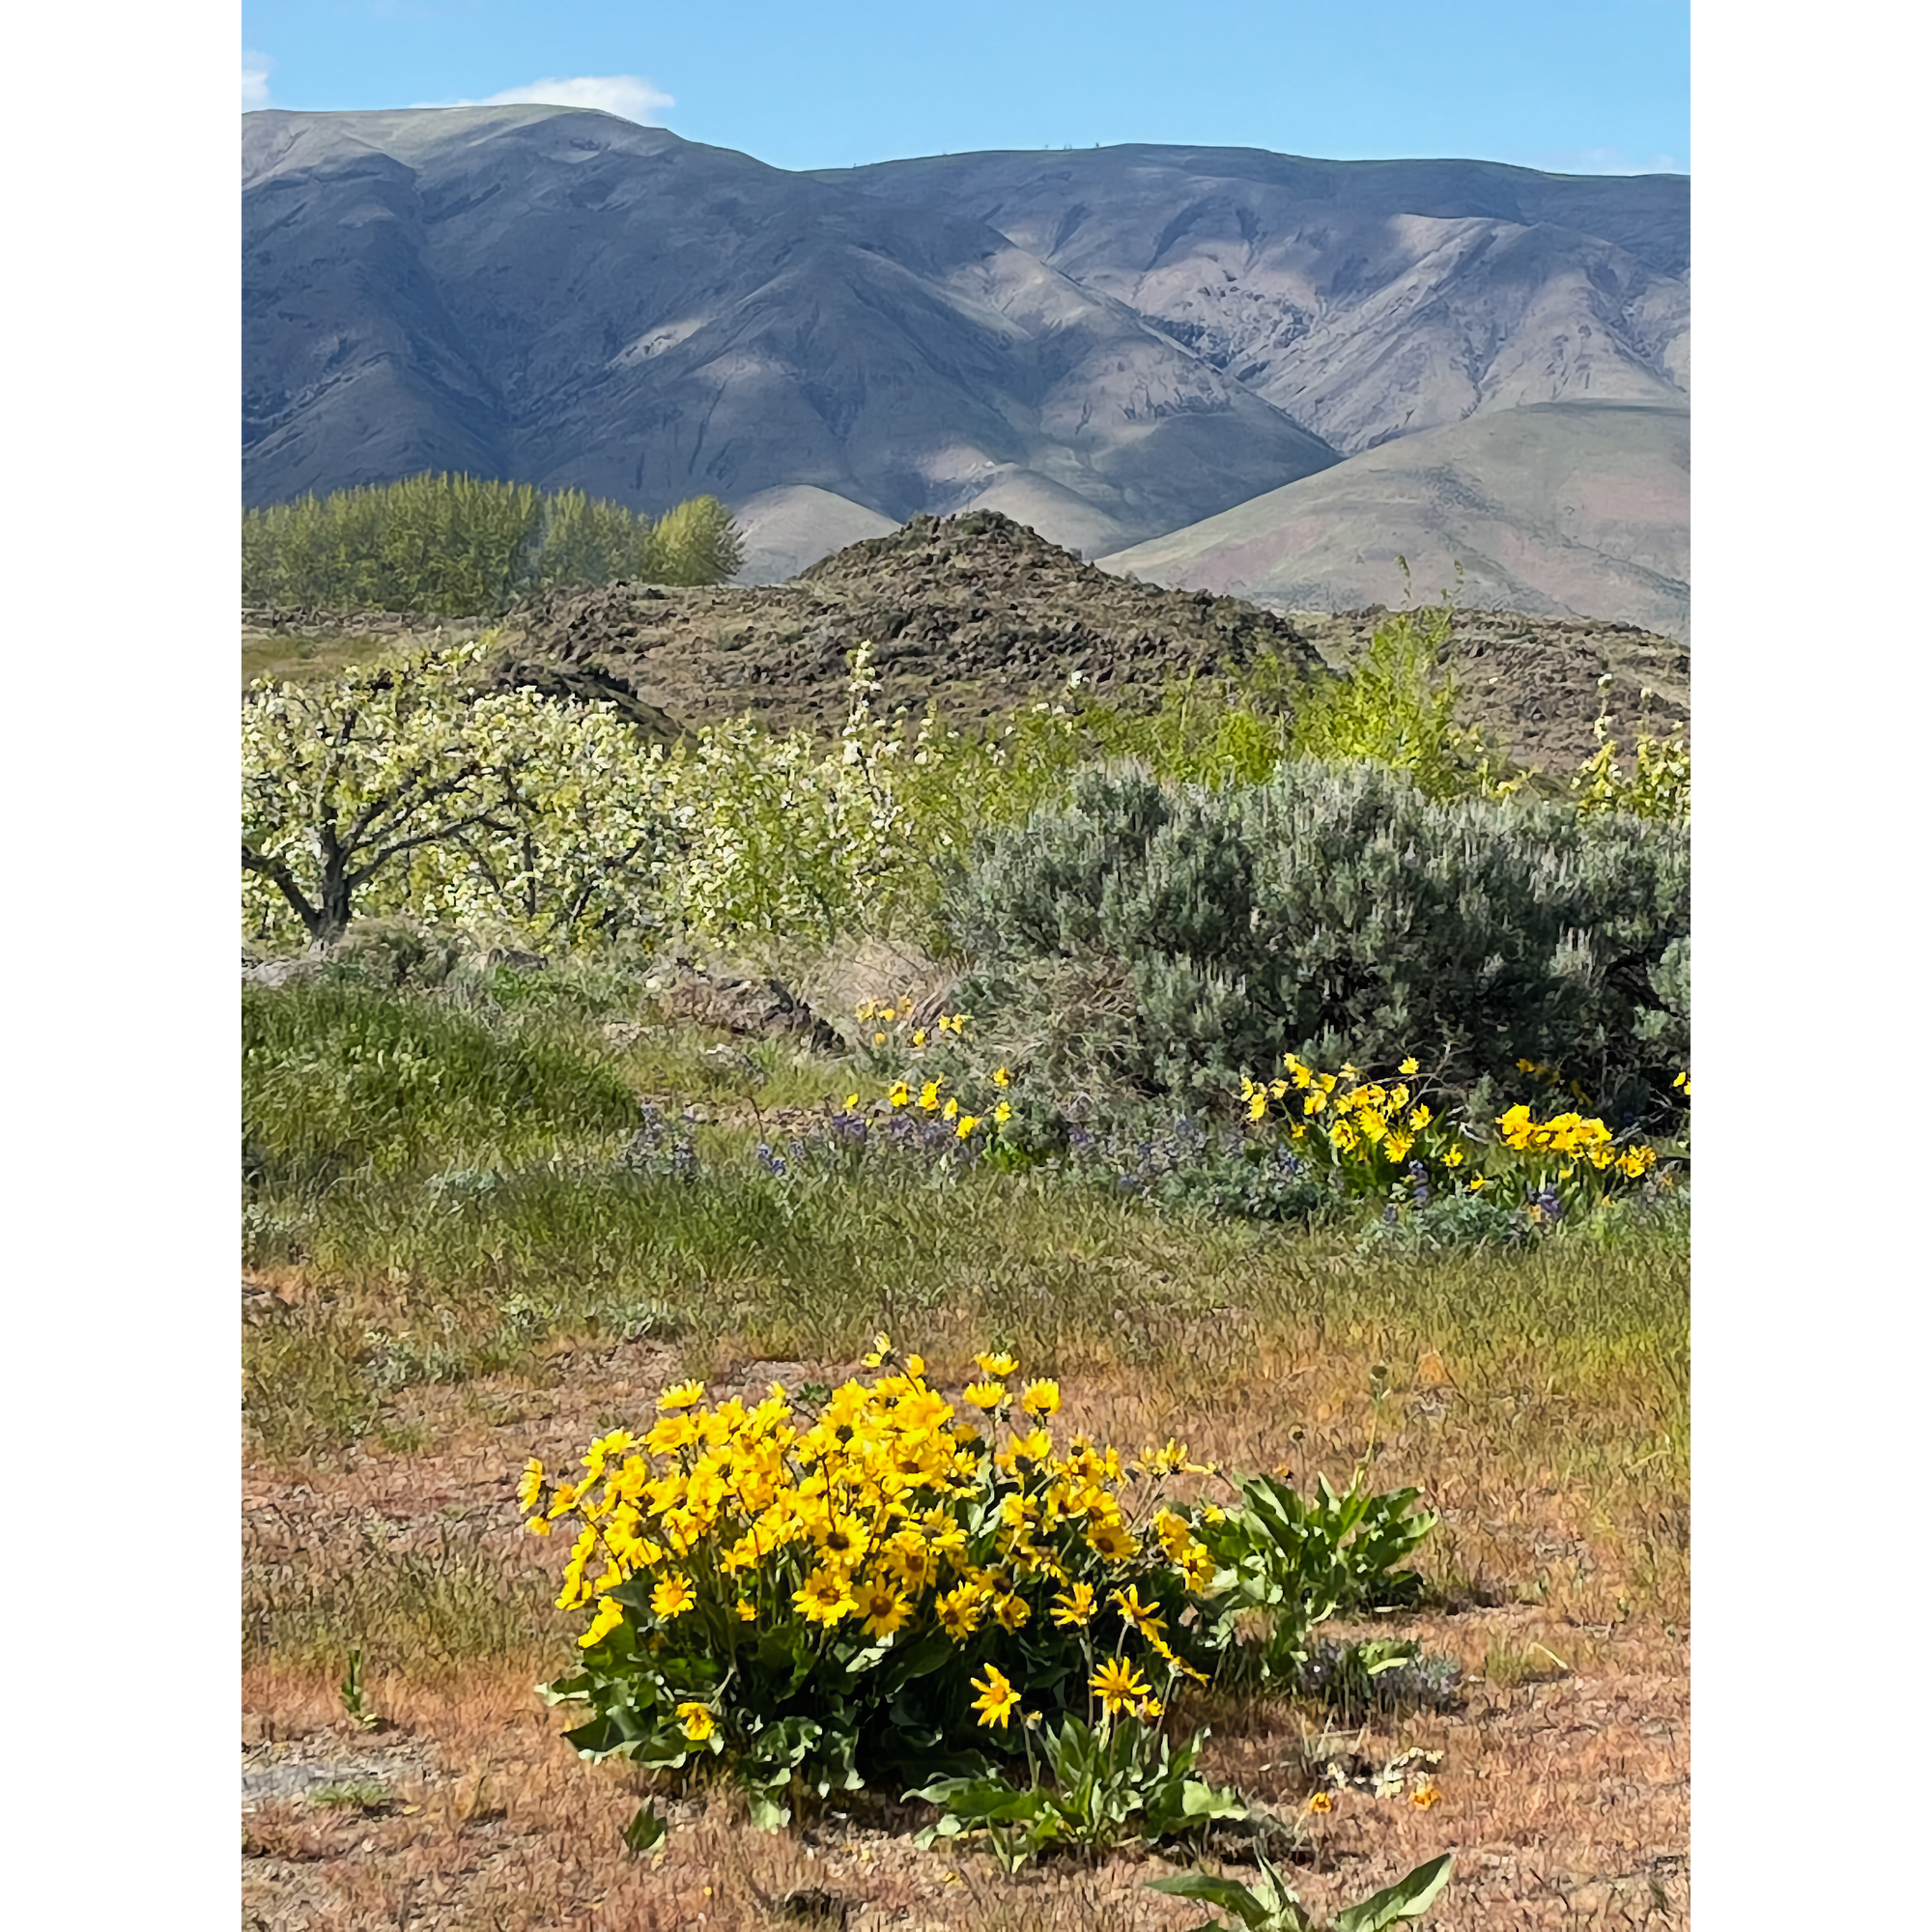 Photo of Cleman Mountain, with yellow balsamroot in foreground